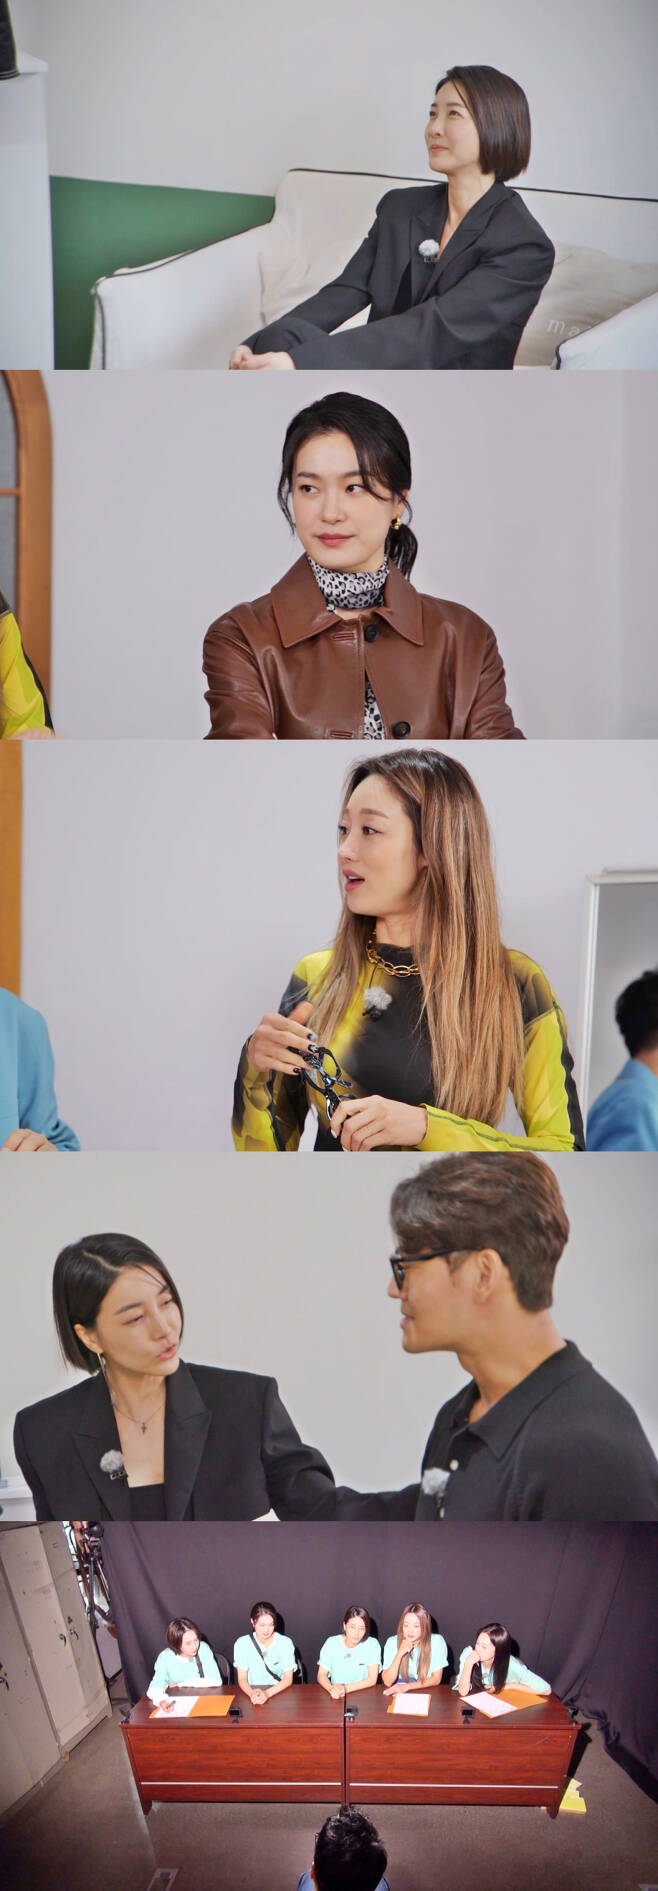 On SBS Running Man, which will be broadcast on the 11th, Scene Stiller Actor Jin Seo-yeon, Ok Ja-yeon and Choi Yeo-jin will appear as guests.This week, Race is determined to be a penalty sticker for members in the hands of the guests with the long-term project Three Punishment Projects that is gathering topics every day.The guest trio, who have been together in the recent recording, caught the eye with their appearance.Actor Jin Seo-yeon, who made a strong impression with a cool villain Acting in the movie Dokjeon and SBS gilt drama Wonder Woman, made Kim Jong-kooks hands politely gather with his unique aura, followed by Spicy Taste, and Kim Jong-kook said, I can not say a word. The mode was mounted.Ok Ja-yeon, who attracted attention with the blackening act in the drama Wonderful Rumors, overpowered the members with one eye and made them sweat in their hands.Choi Yeo-jin, who showed off the charm of the girl crush every time he appeared, showed the unstoppable attack power again and embarrassed the members.In addition, they conducted a pressure investigation with charisma and extraordinary gestures that were full of time to interview the opponent team.It is more like a movie than a movie, giving a strong immersion and raising the tension of Race.